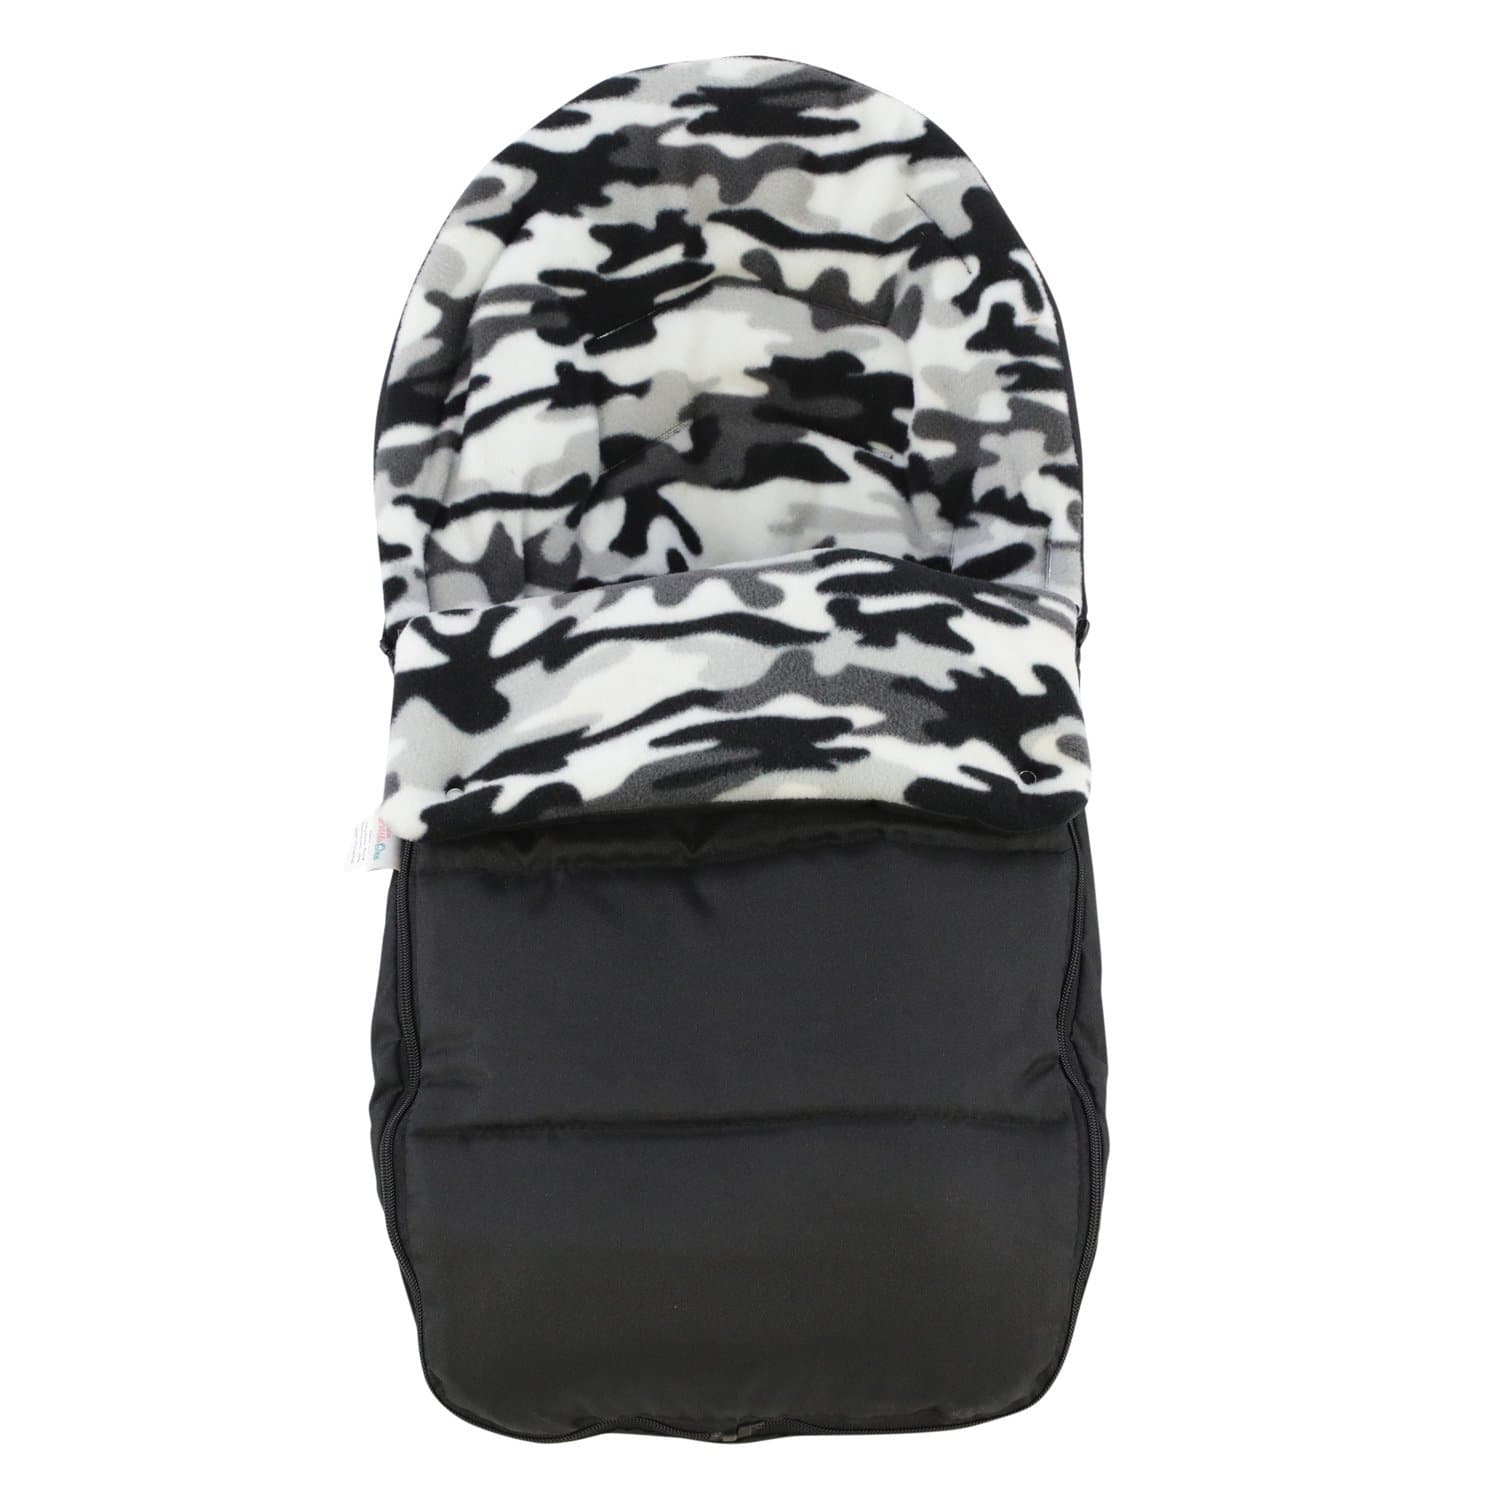 Fleece Car Seat Footmuff / Cosy Toes Compatible with Cybex - Grey Camouflage / Fits All Models | For Your Little One